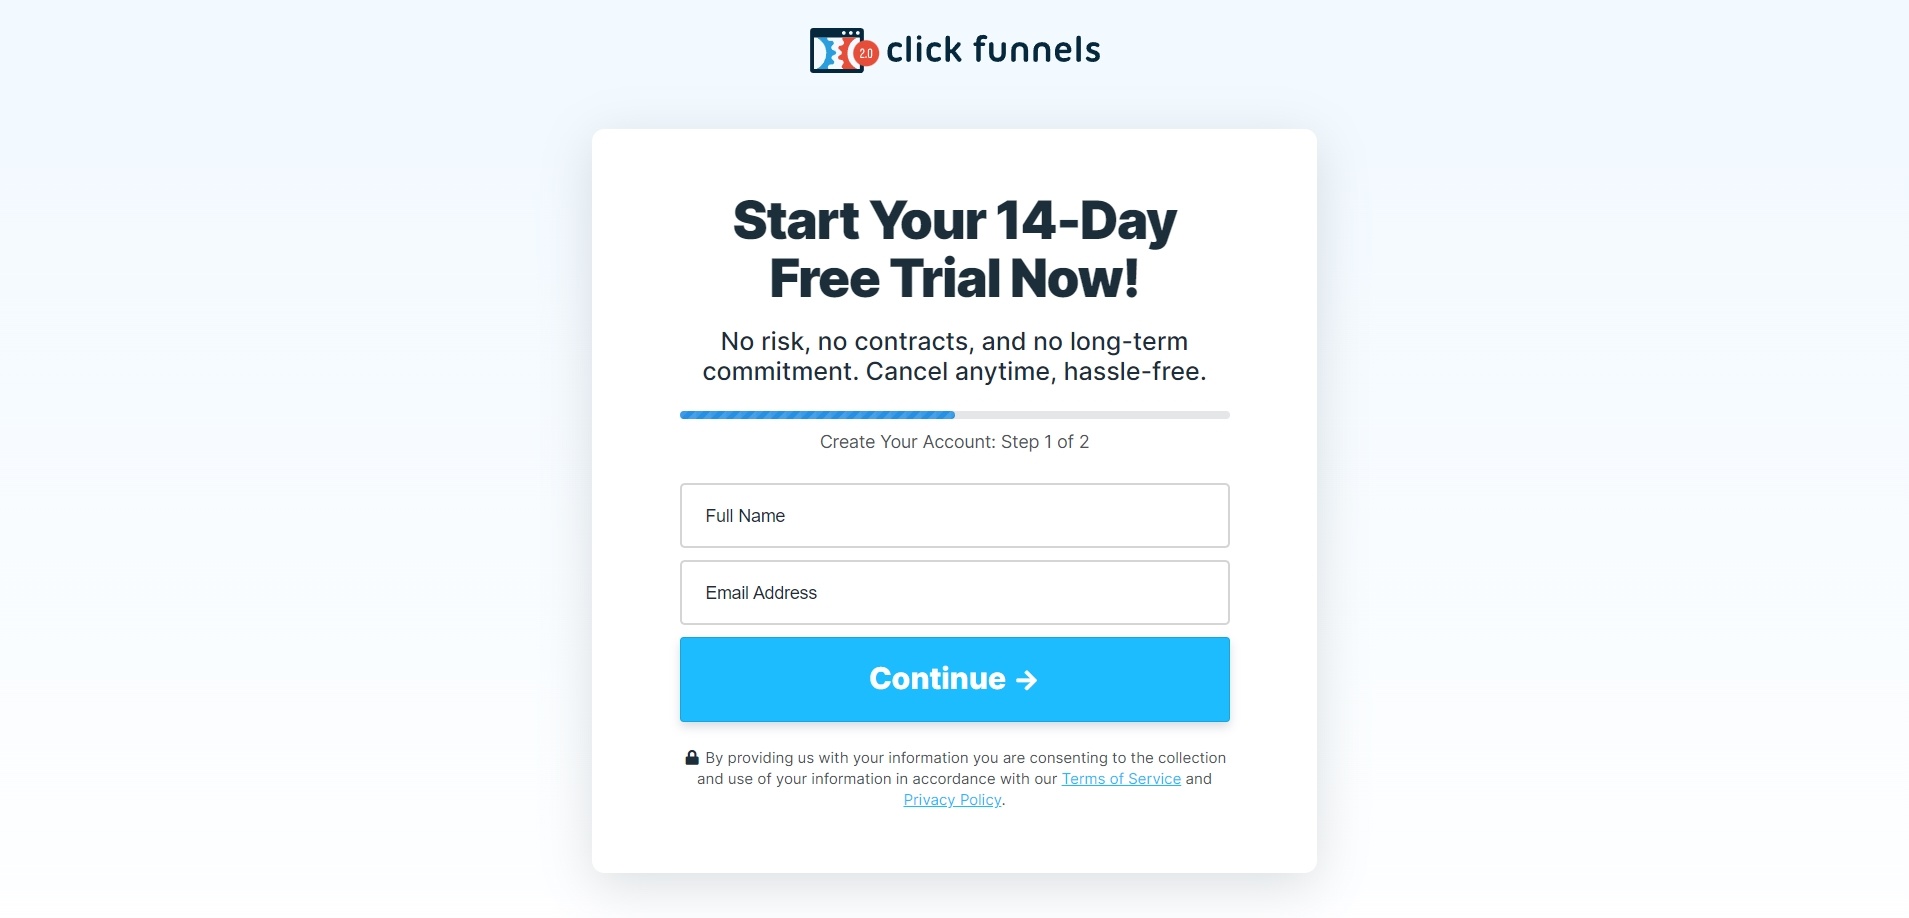 An email sign up example from ClickFunnels, taken from their website